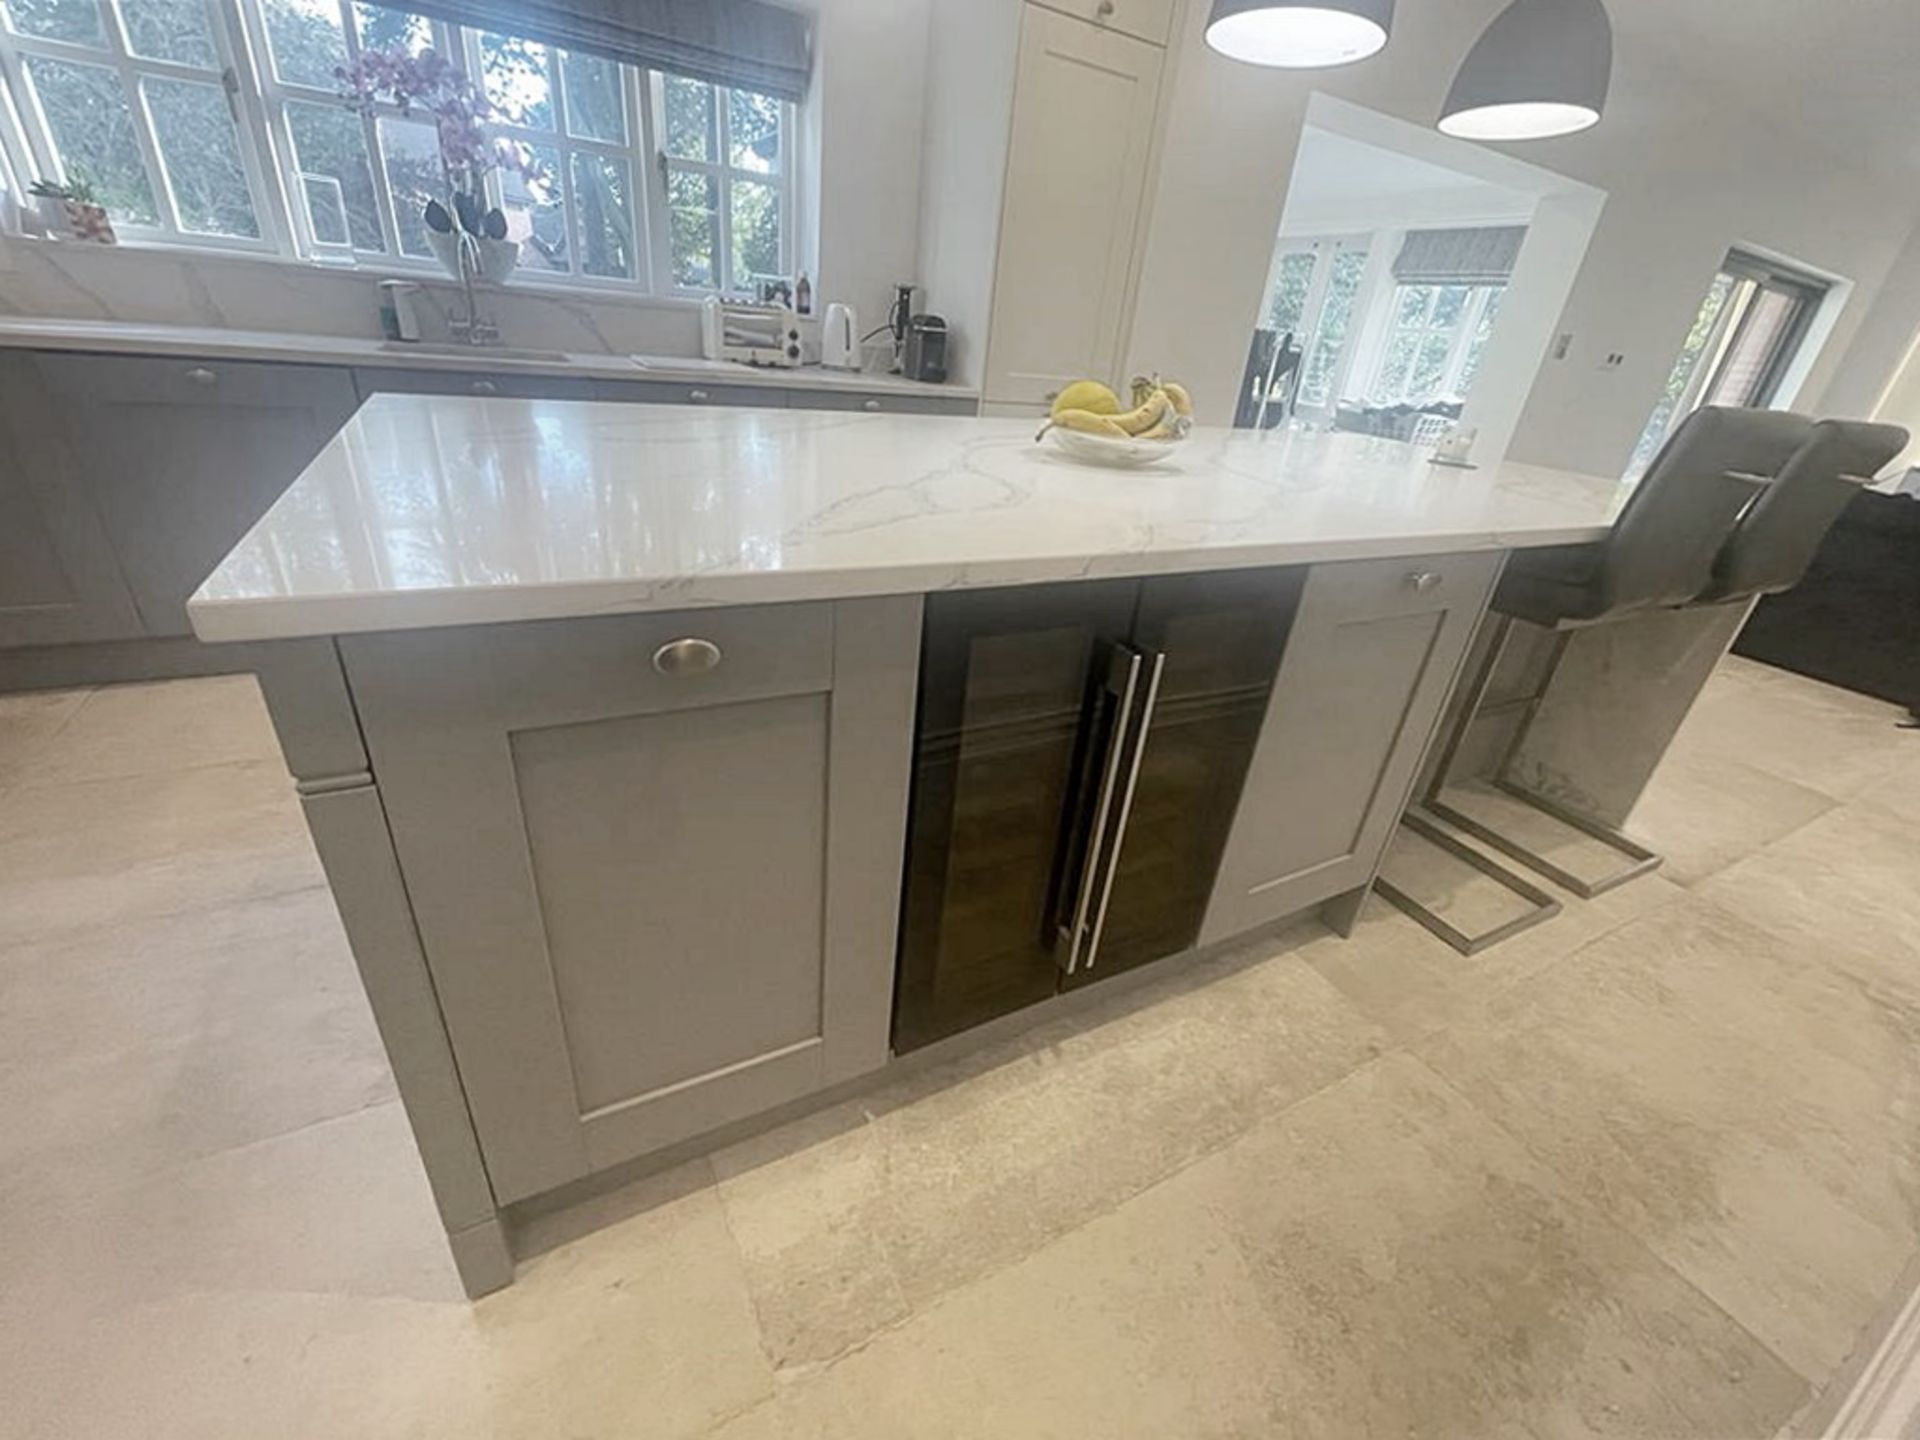 1 x SIEMATIC Bespoke Shaker-style Fitted Kitchen, Utility Room, Appliances & Modern Quartz Surfaces - Image 80 of 99